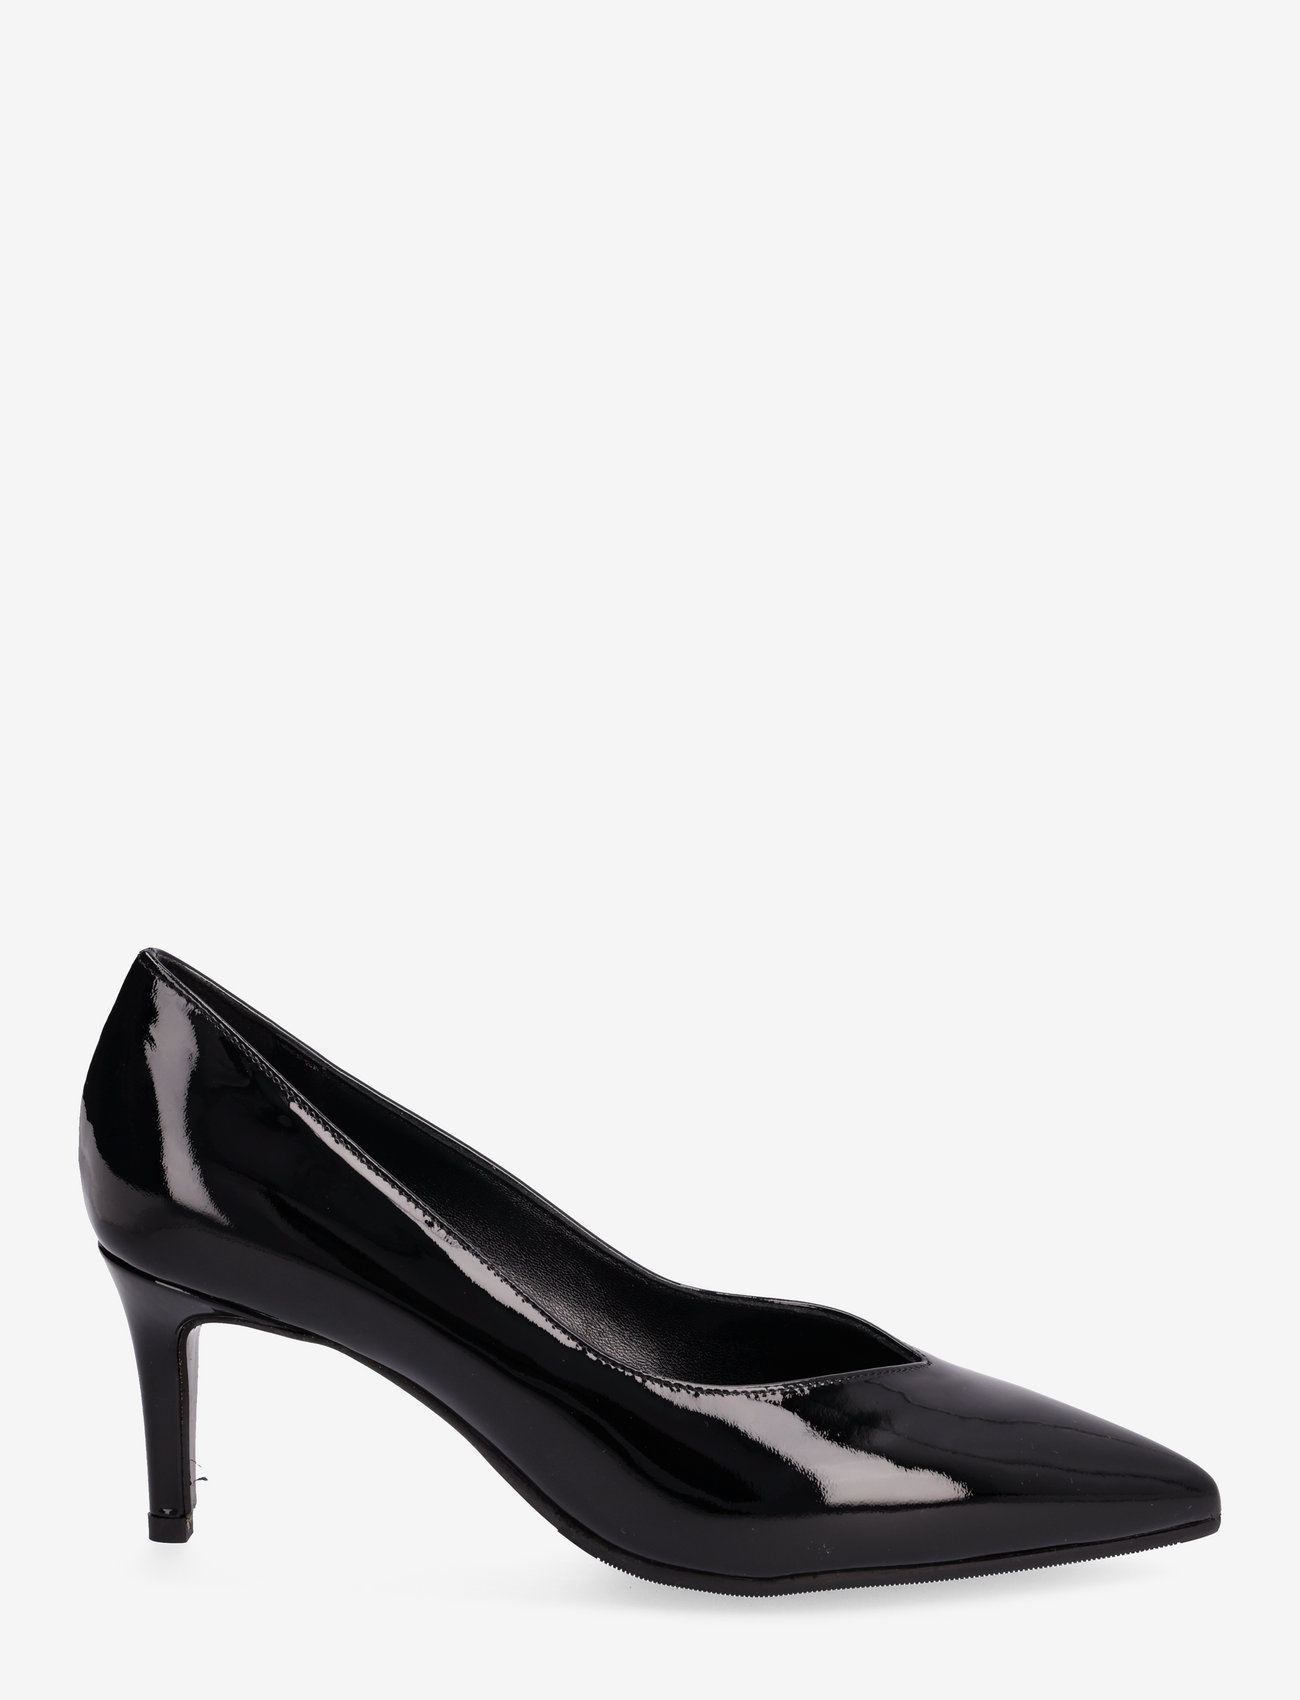 Apair - Low heel stilletto - party wear at outlet prices - nero - 1